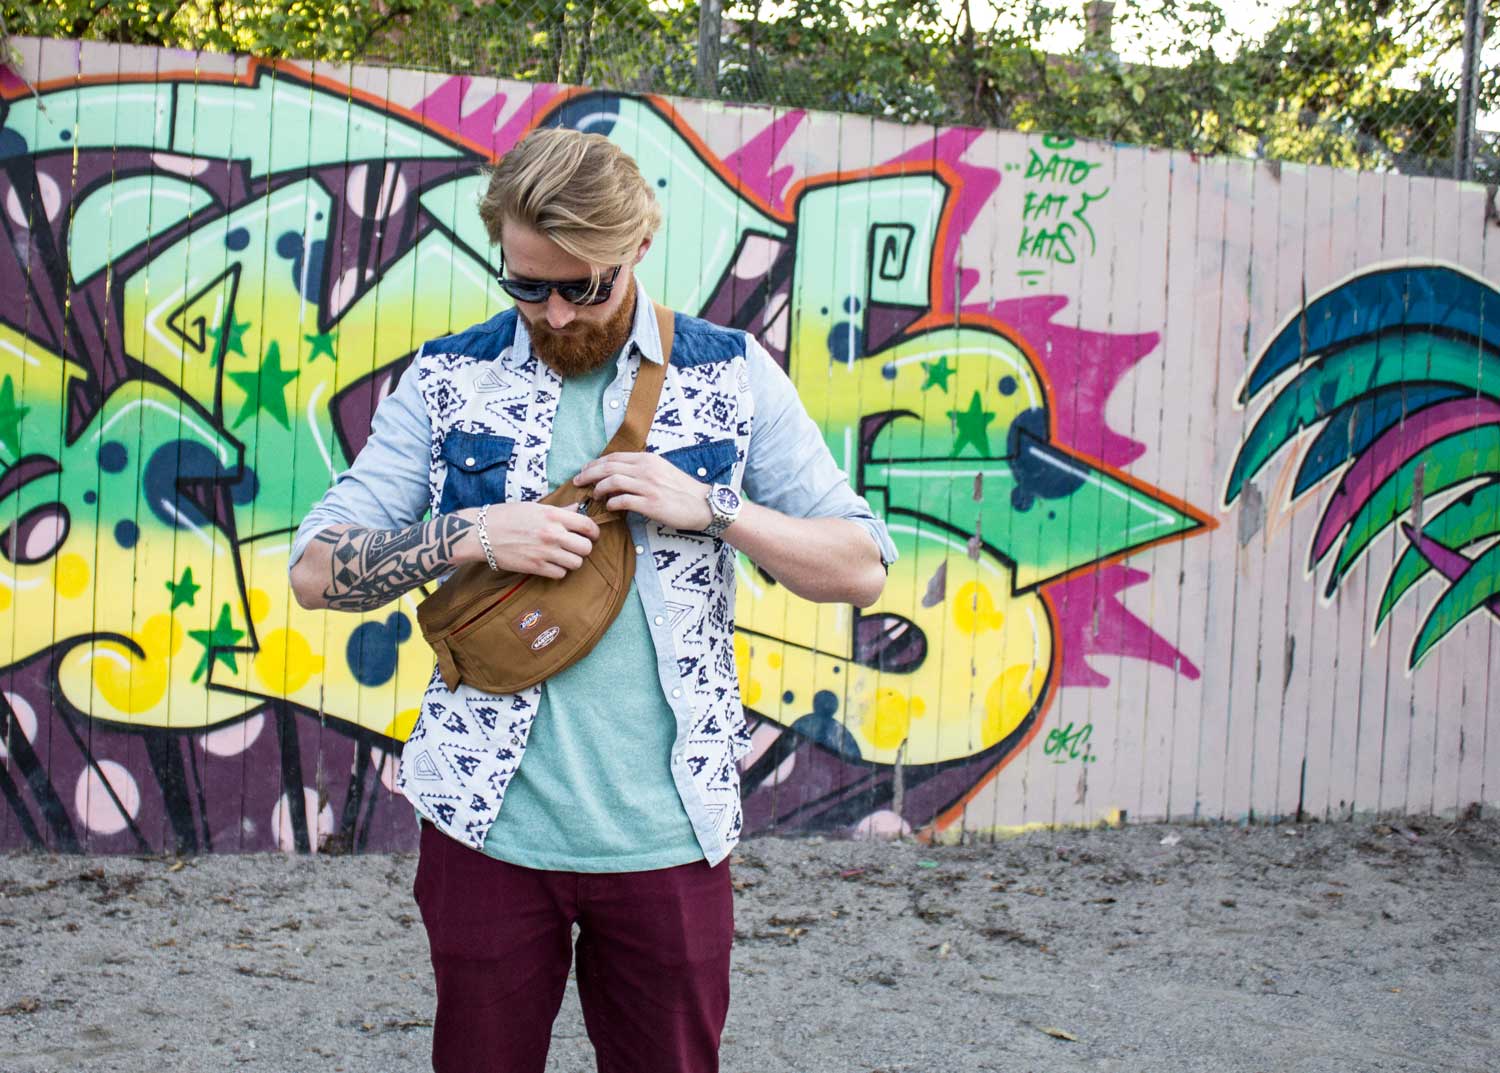 How To Wear Men's Fanny Packs in Style: An Easy Fashion Guide